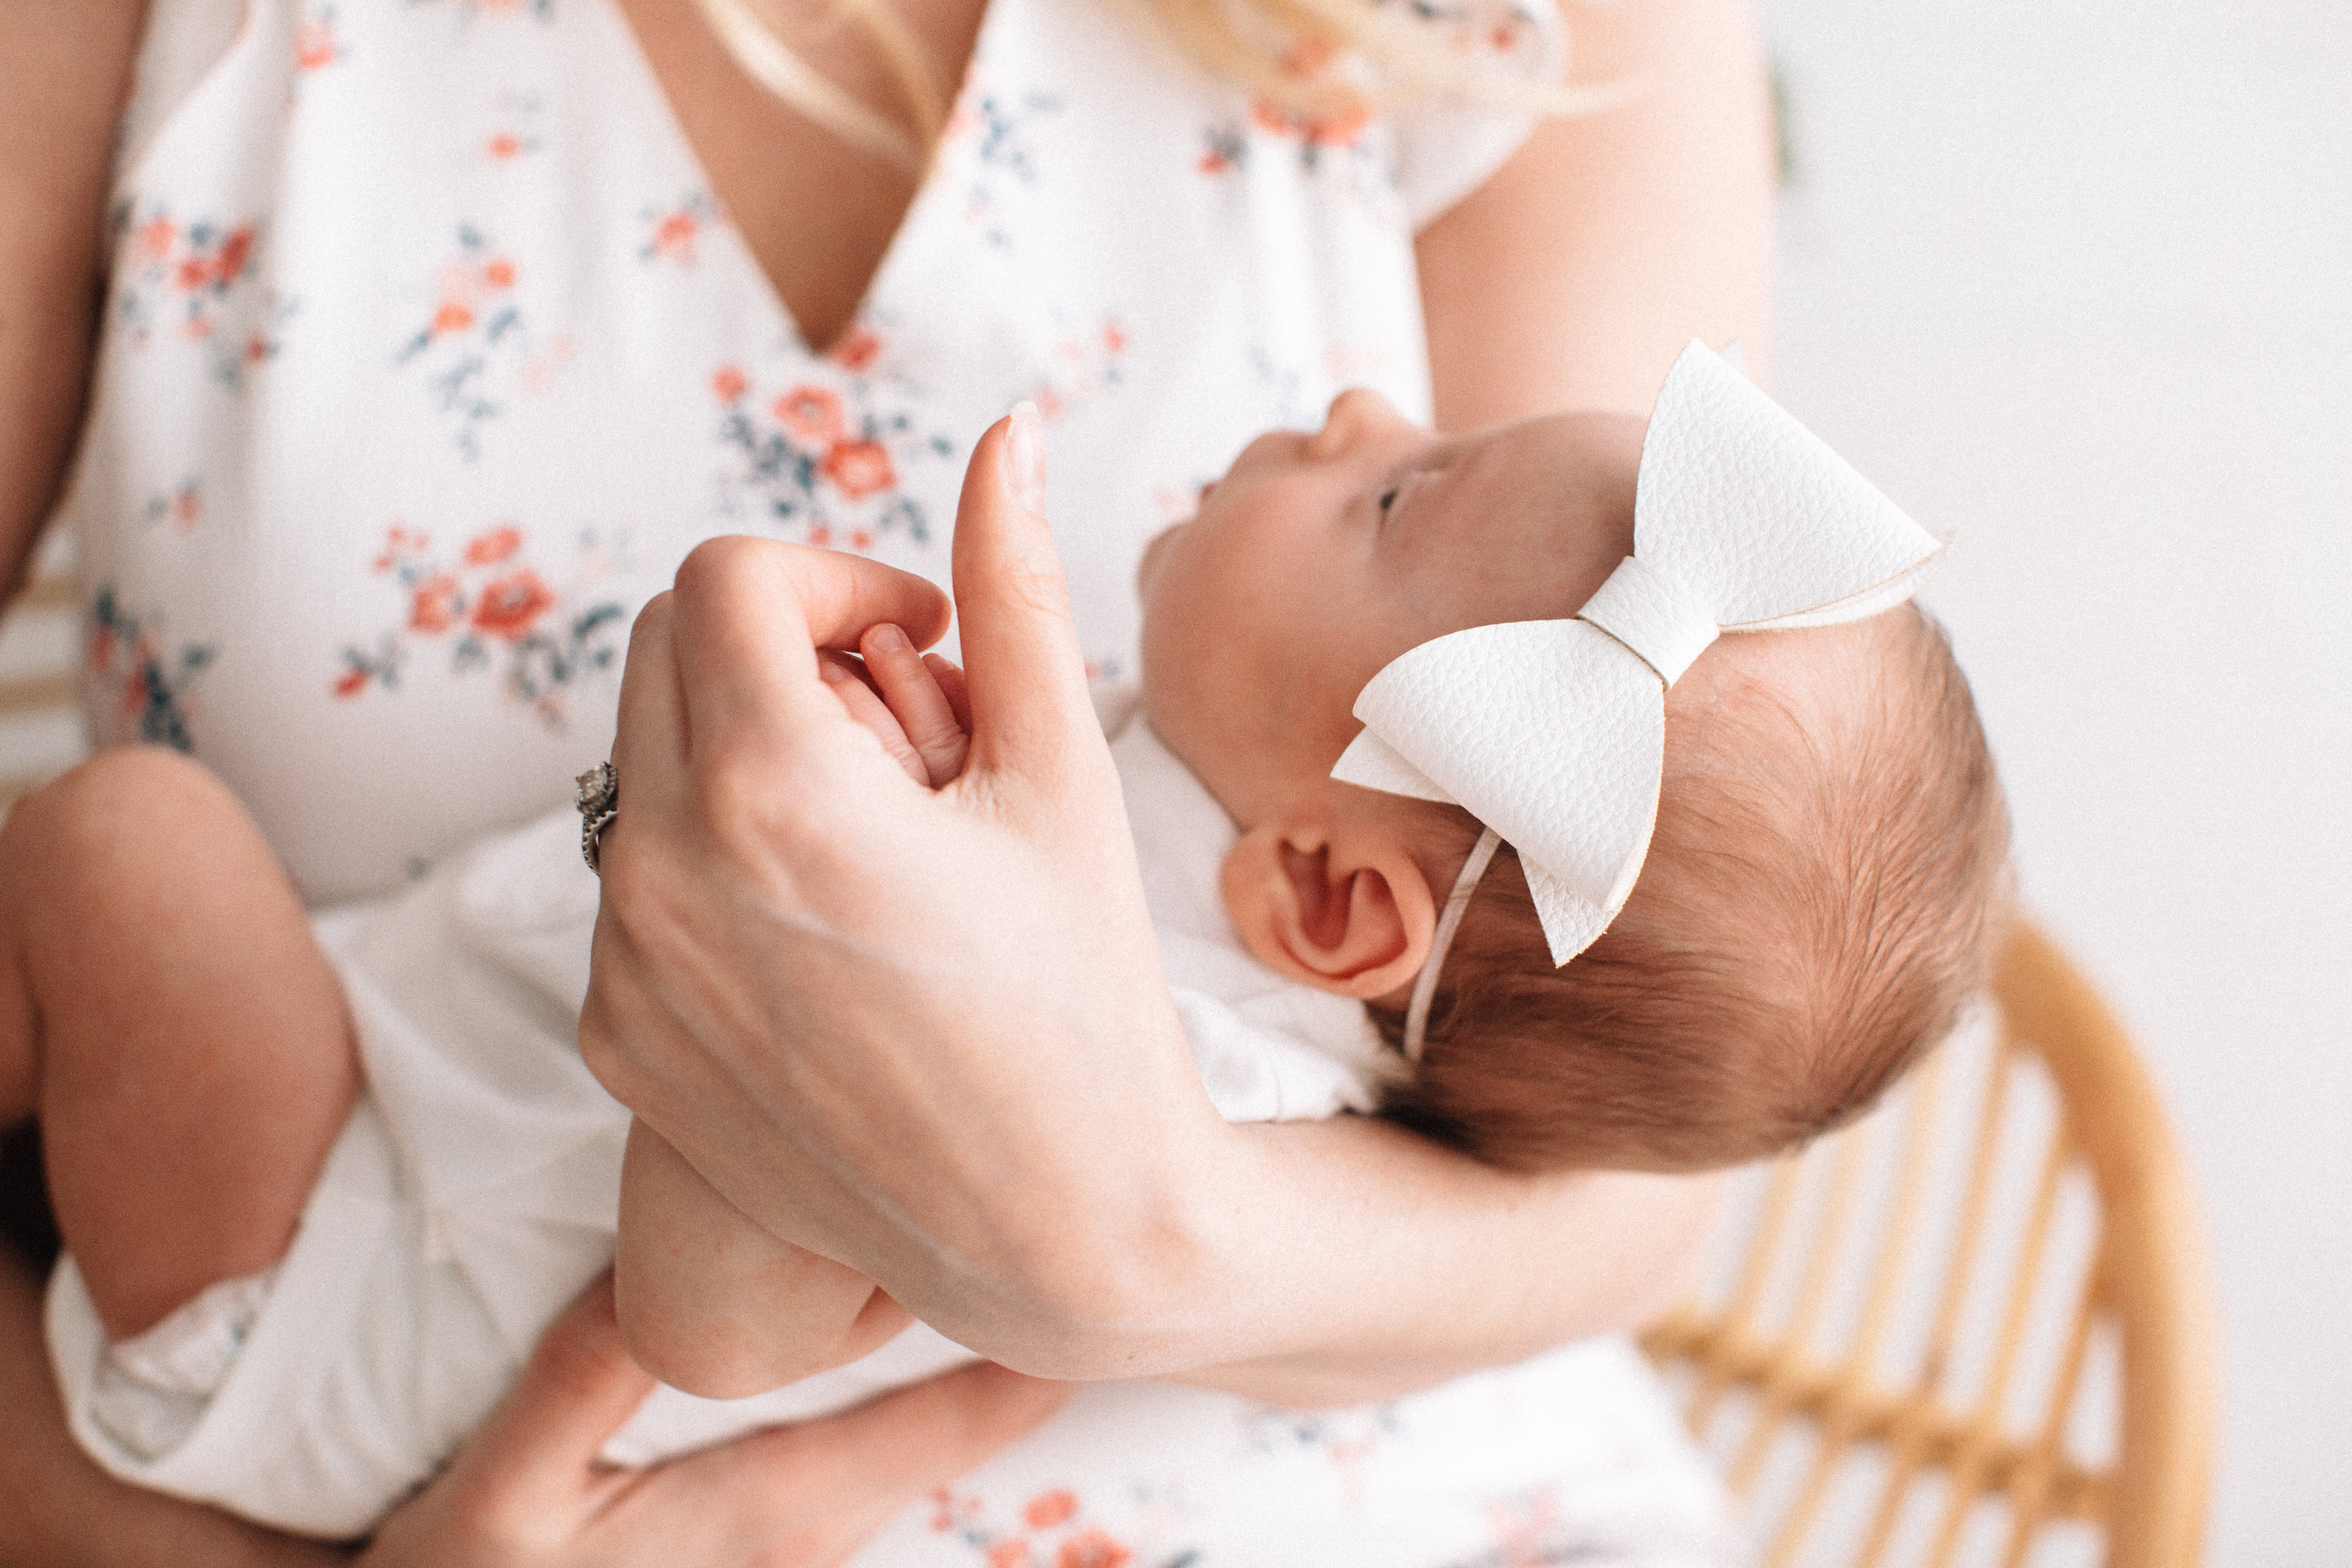 5 Things All New Moms Need to Hear